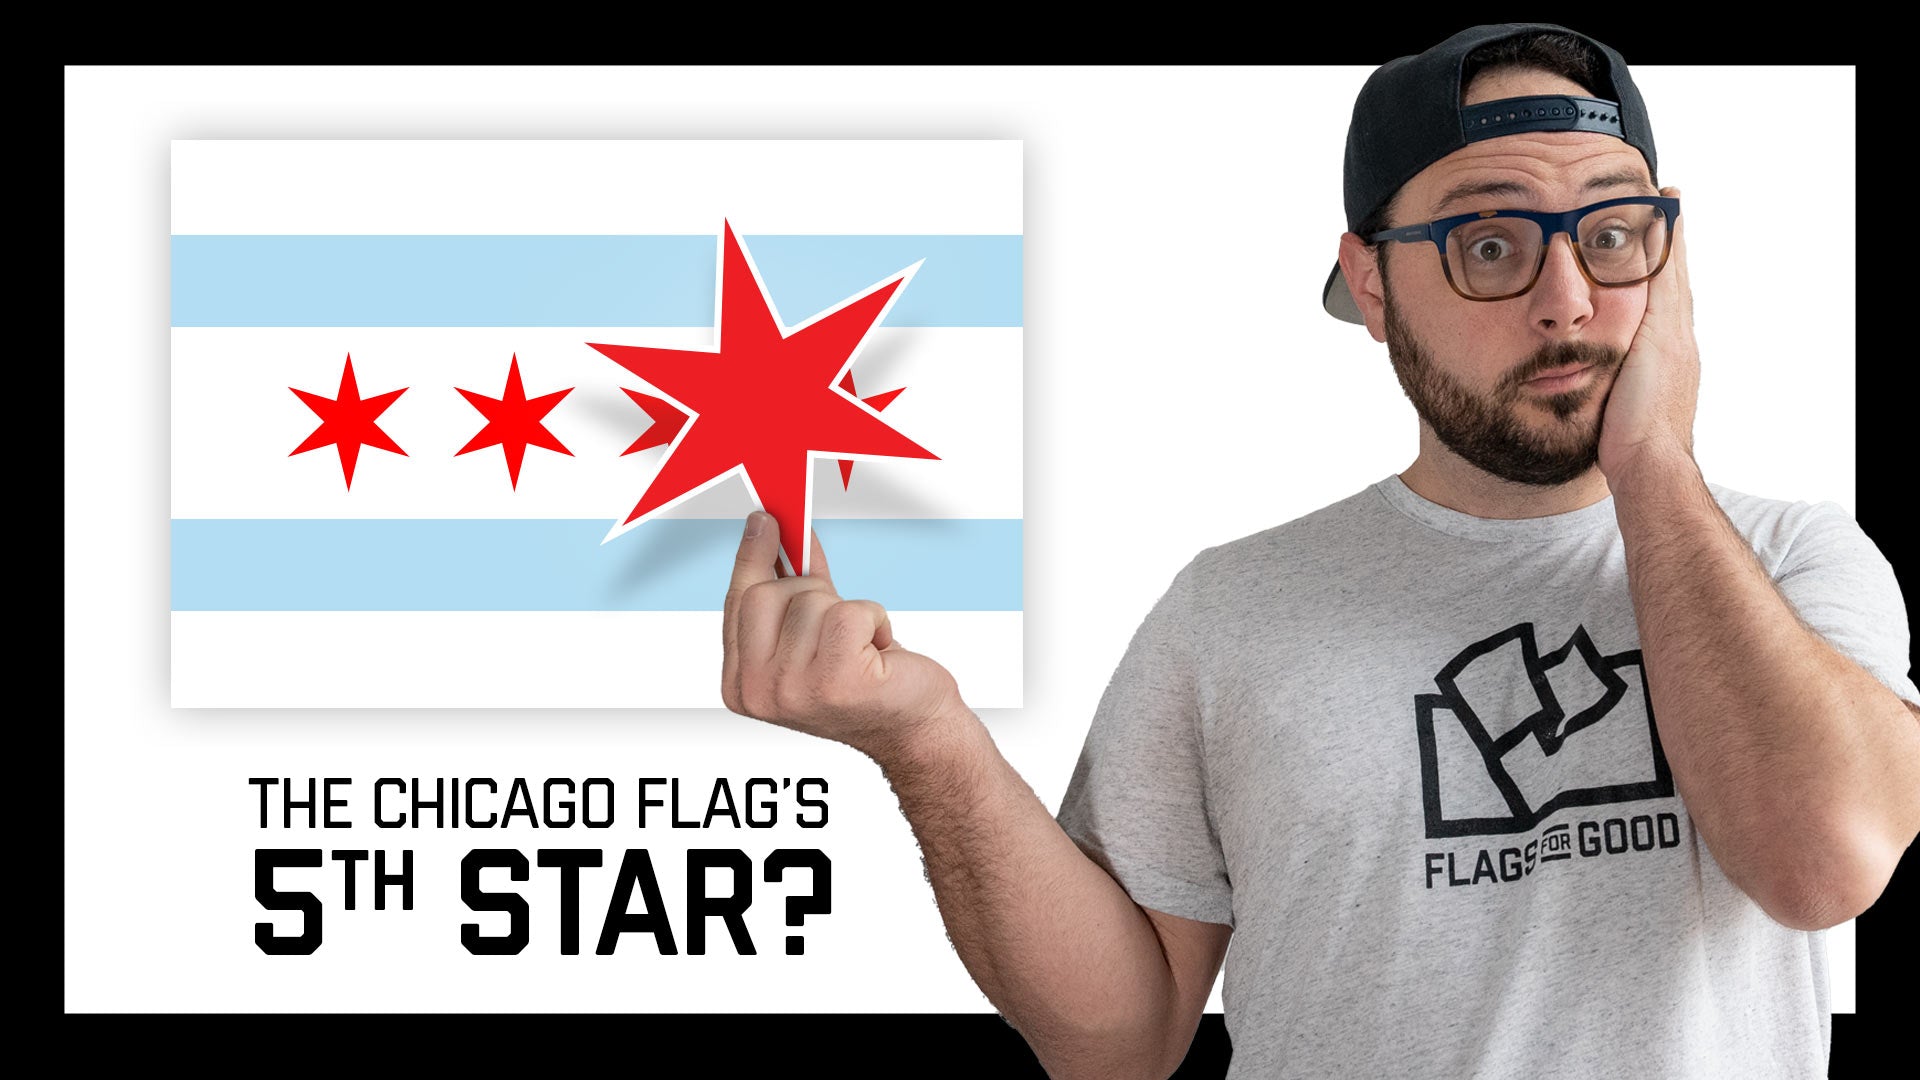 Everything you need to know about the Chicago Flag (and some you don't)